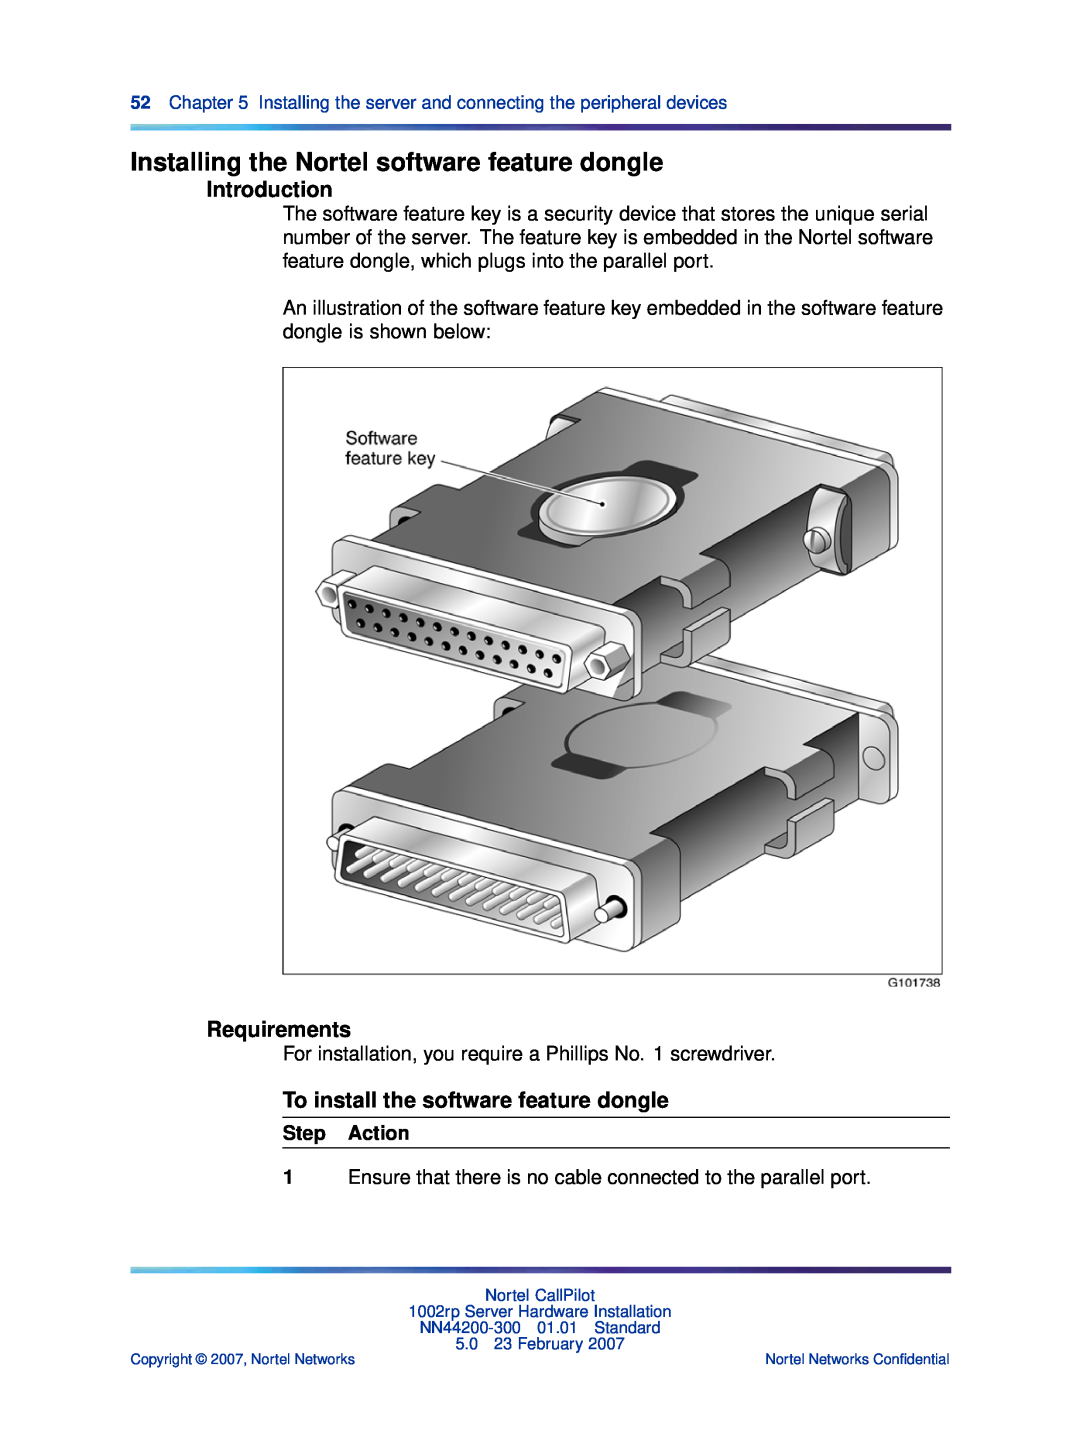 Nortel Networks NN44200-300 manual Installing the Nortel software feature dongle, Requirements, Introduction, Step Action 